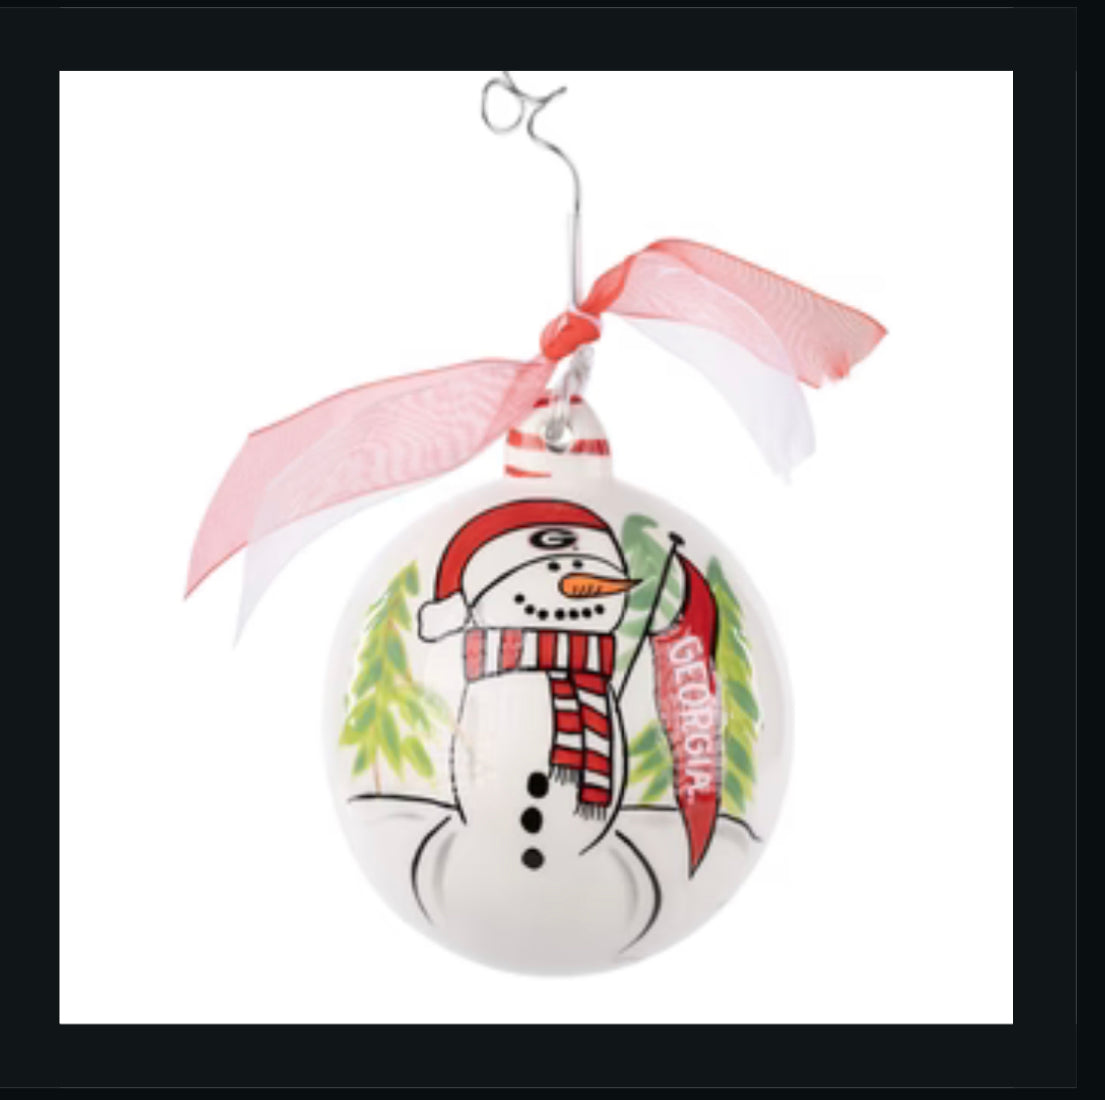 Christmas ornament featuring a snowman with a Georgia flag, hat, and scarf.